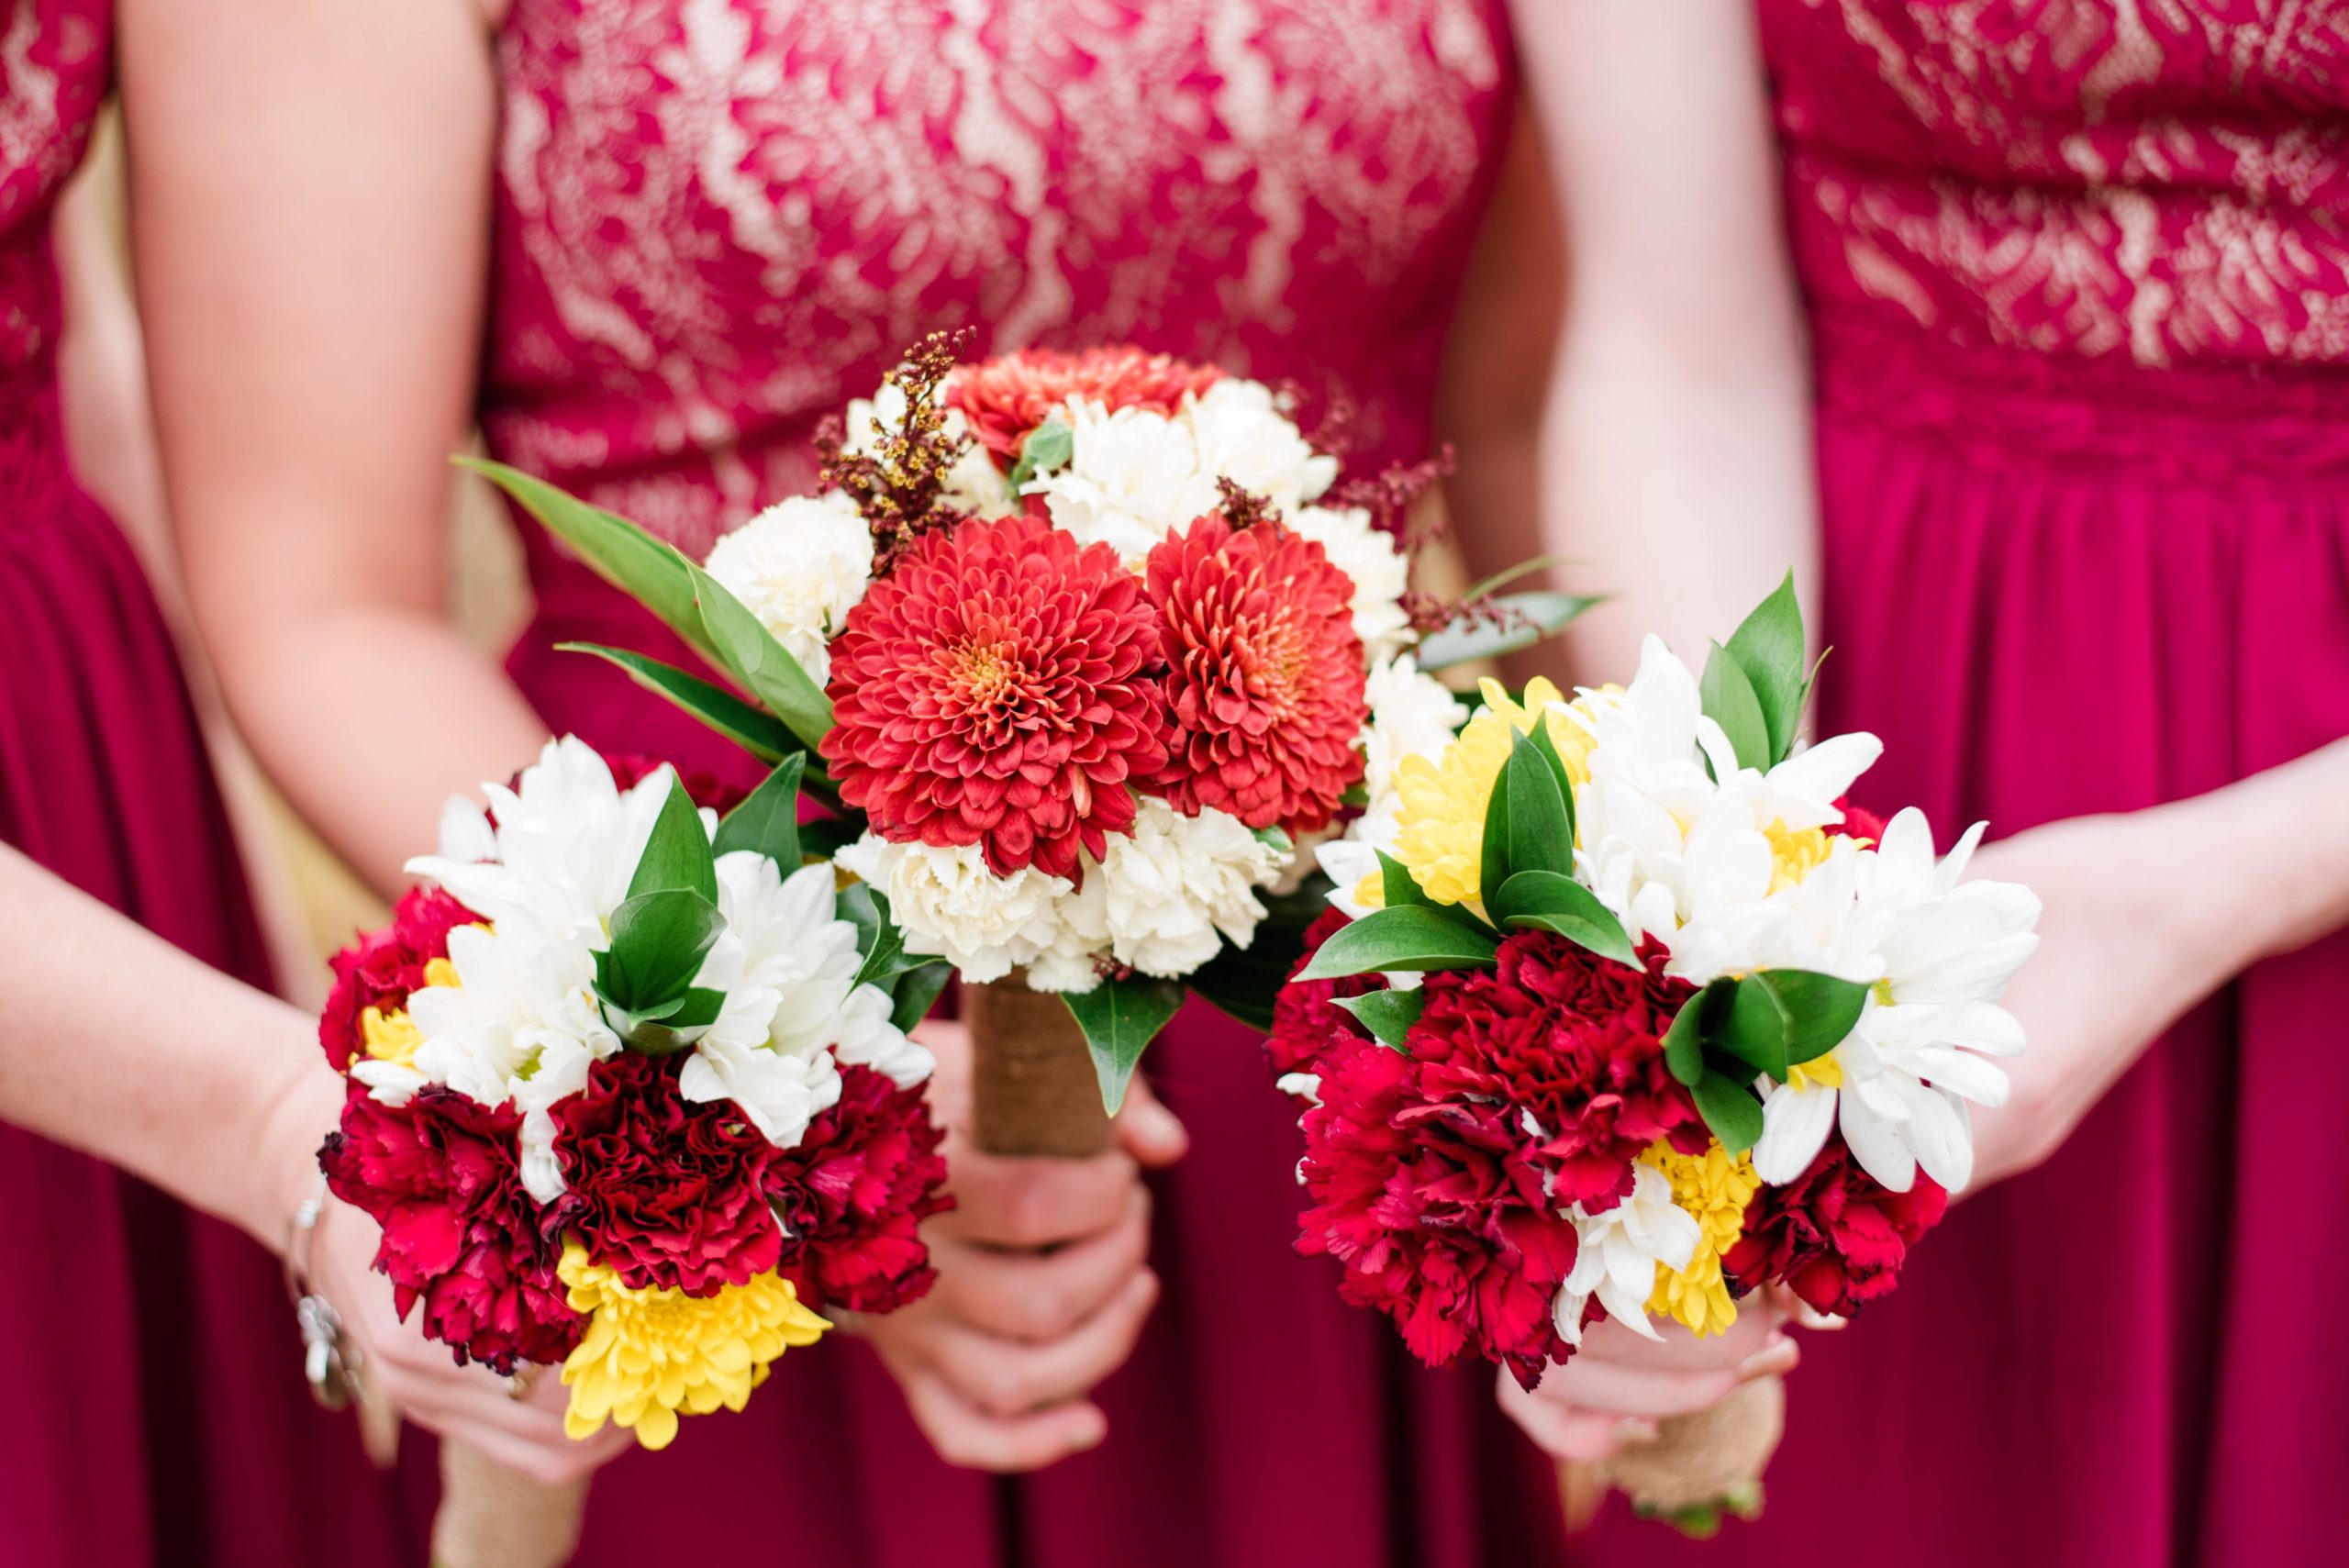 Modest doesn't mean frumpy! 9 tips for finding stylish and modest bridesmaid dresses